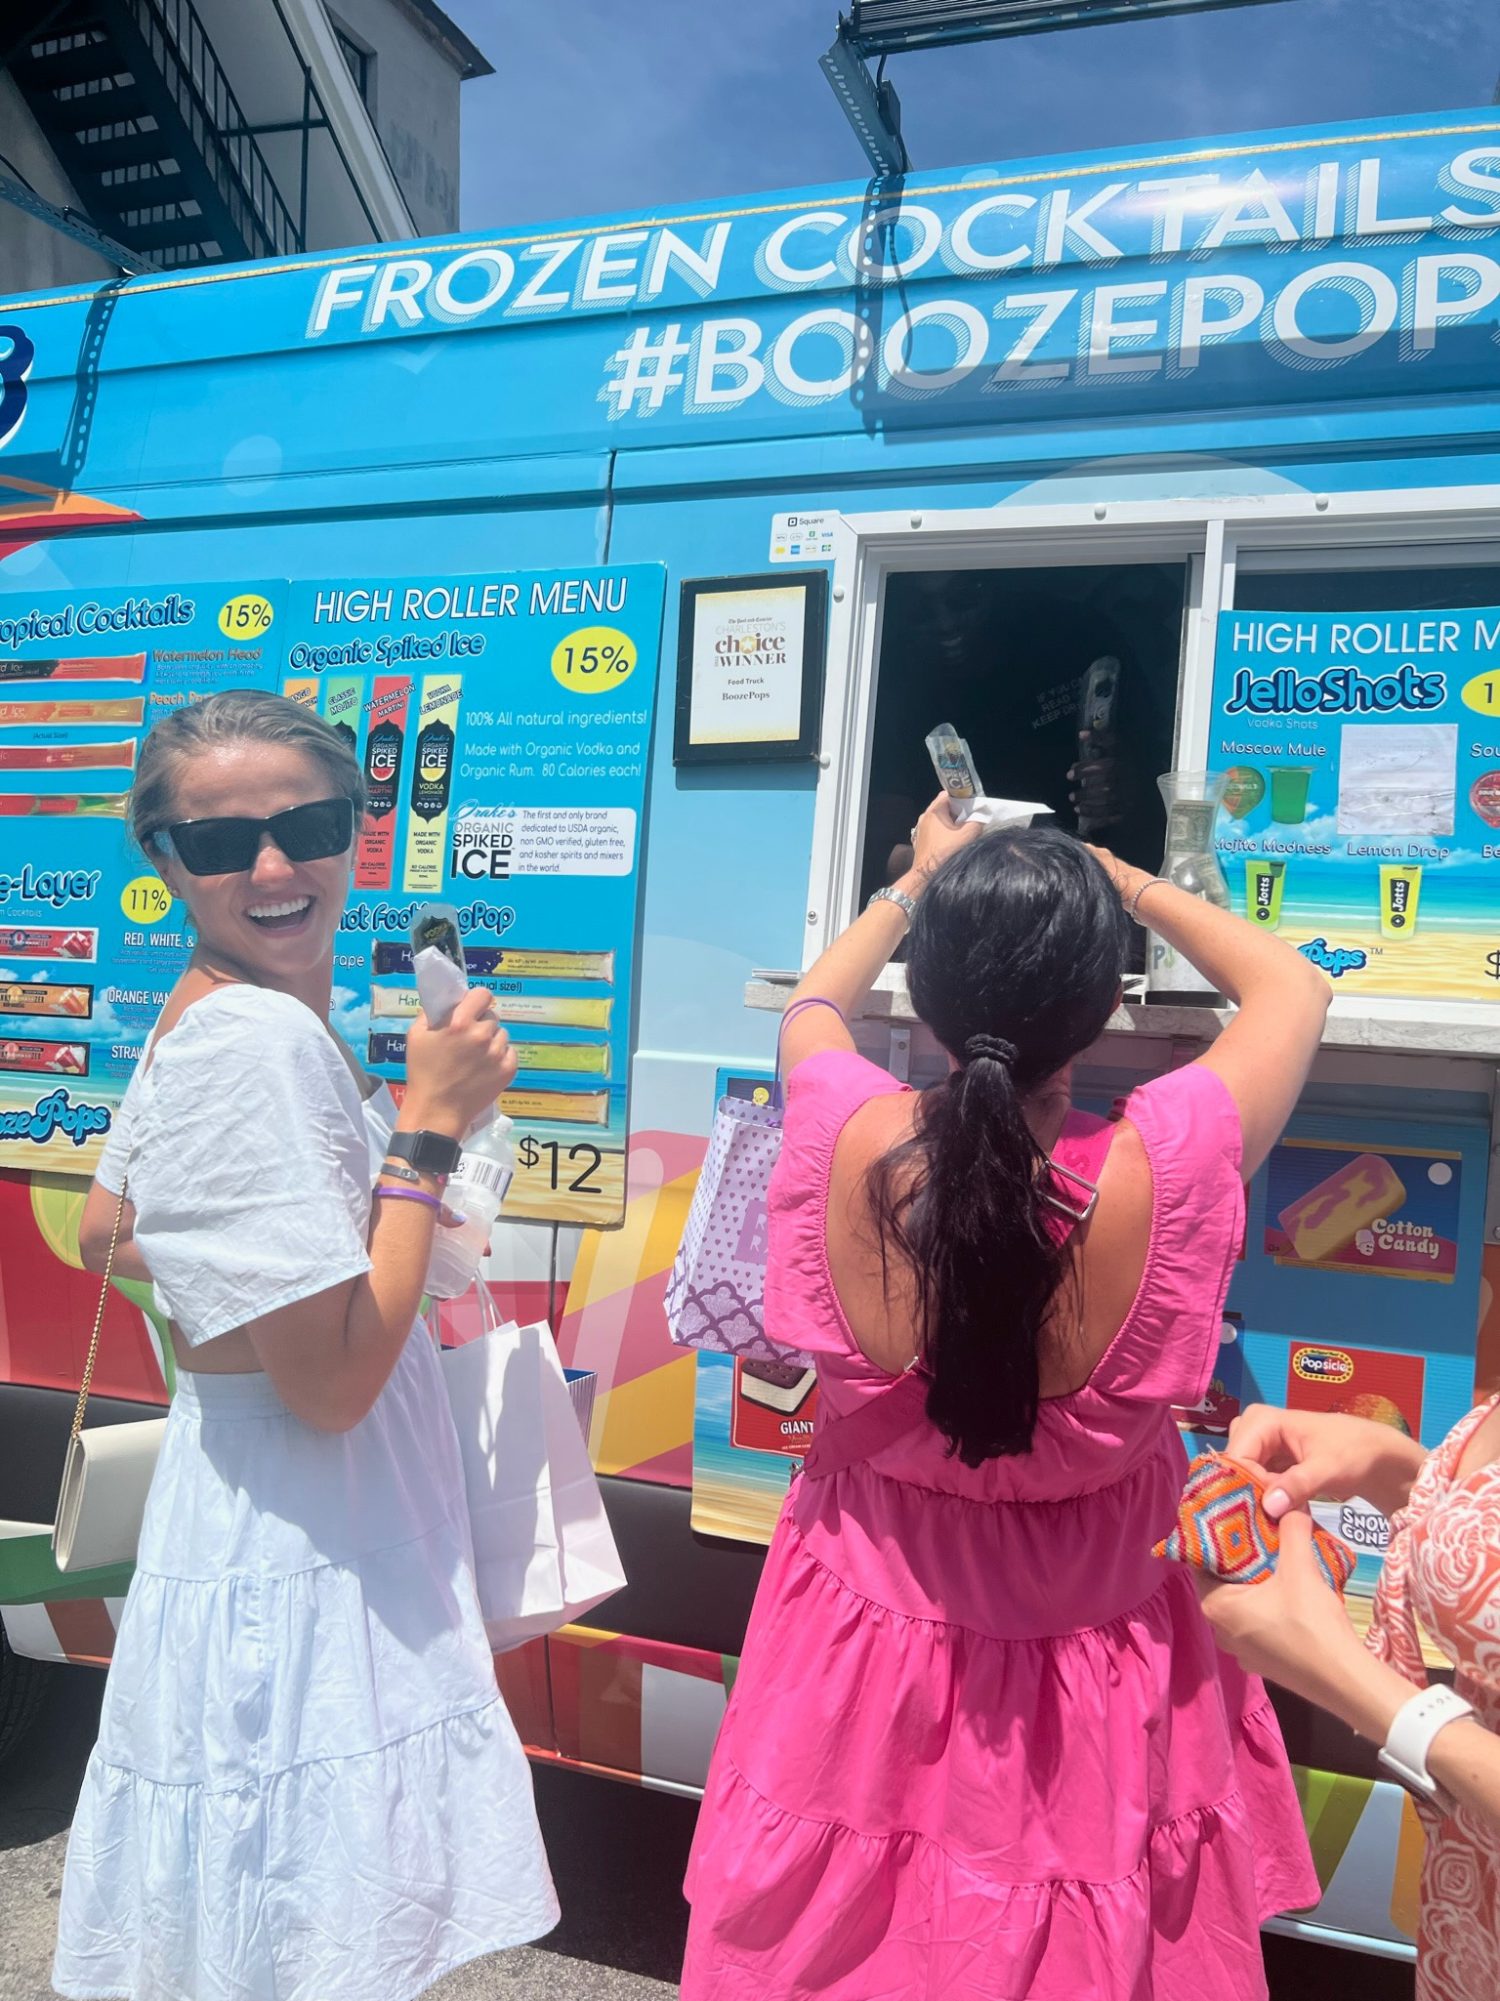 two girls getting booze pops from a ice cream truck. 